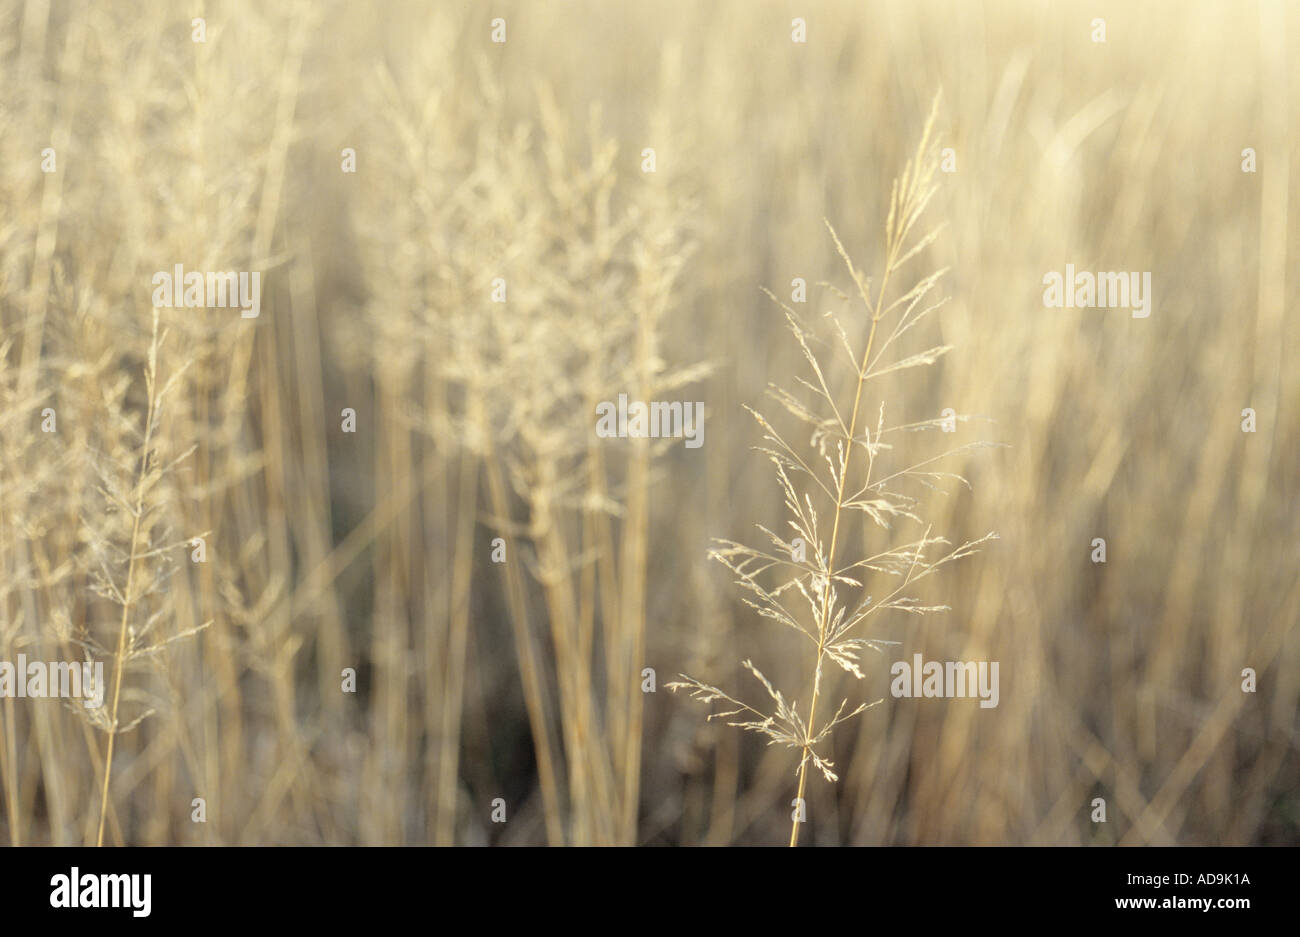 Close up of the edge of a meadow or pasture or field or verge with dried yellowing grasses that have shed their seeds Stock Photo